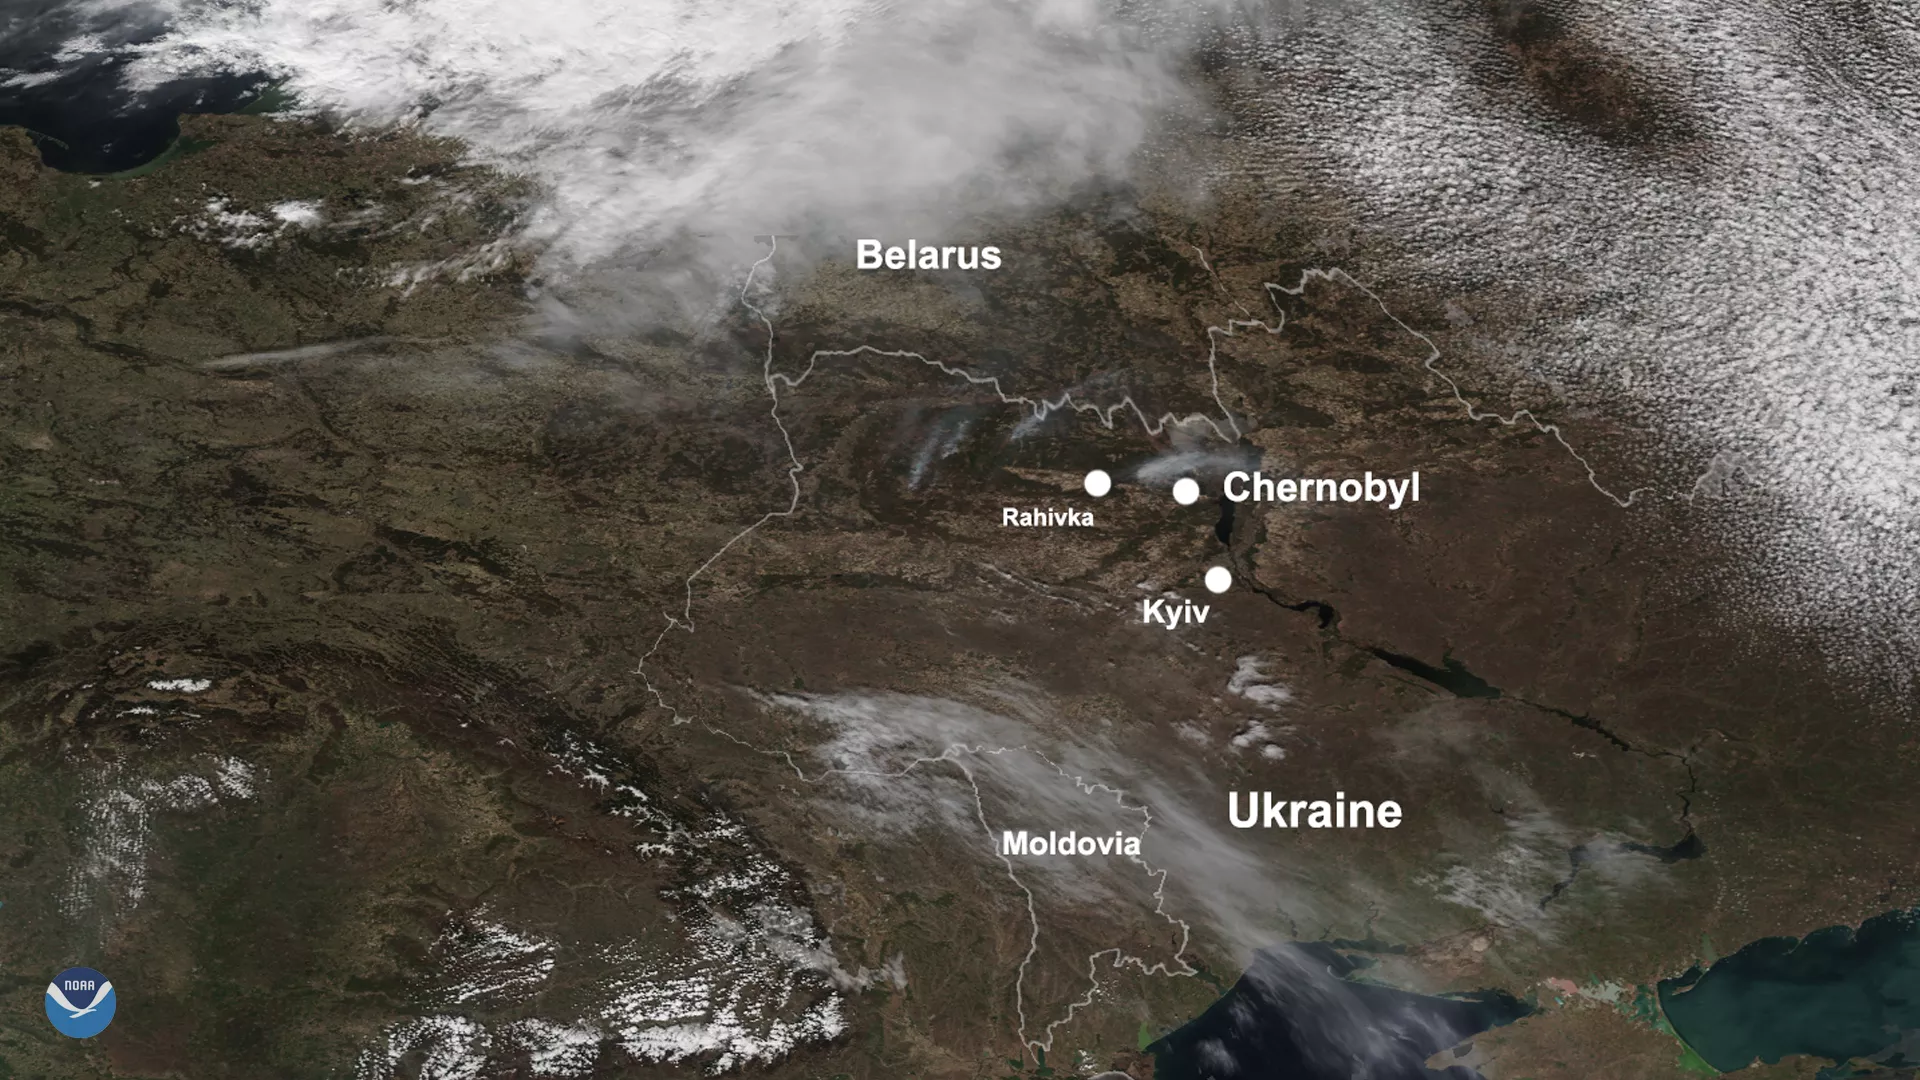 Image of Chernobyl Exclusion Zone from space